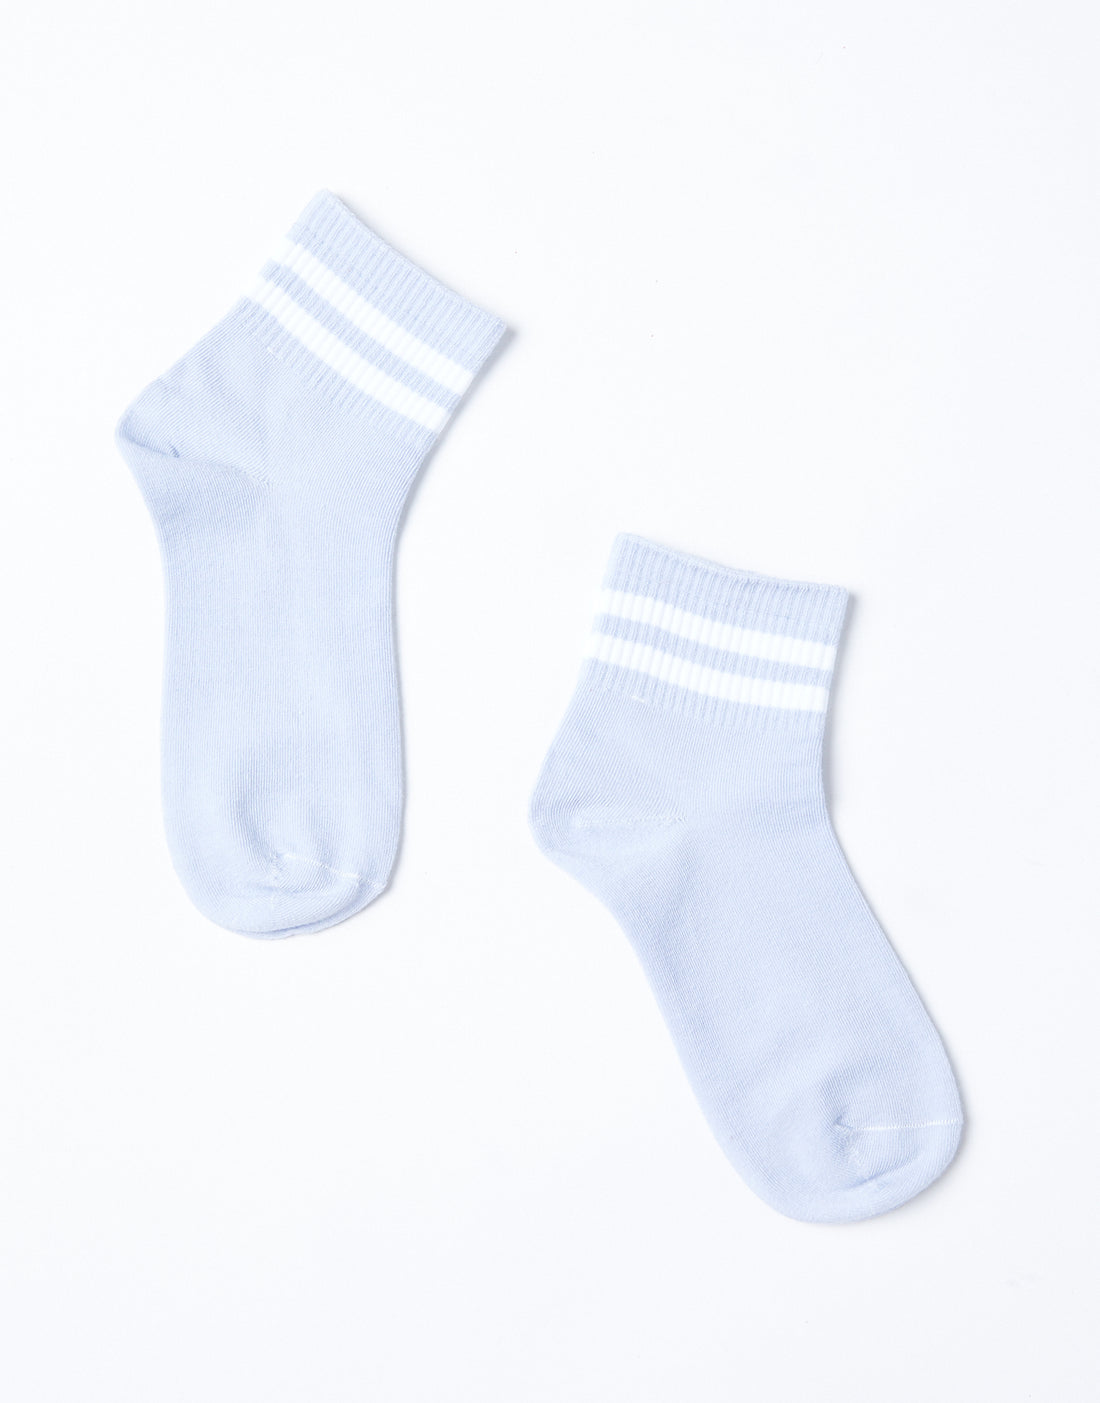 Striped Ankle Socks Accessories Light Blue One Size -2020AVE